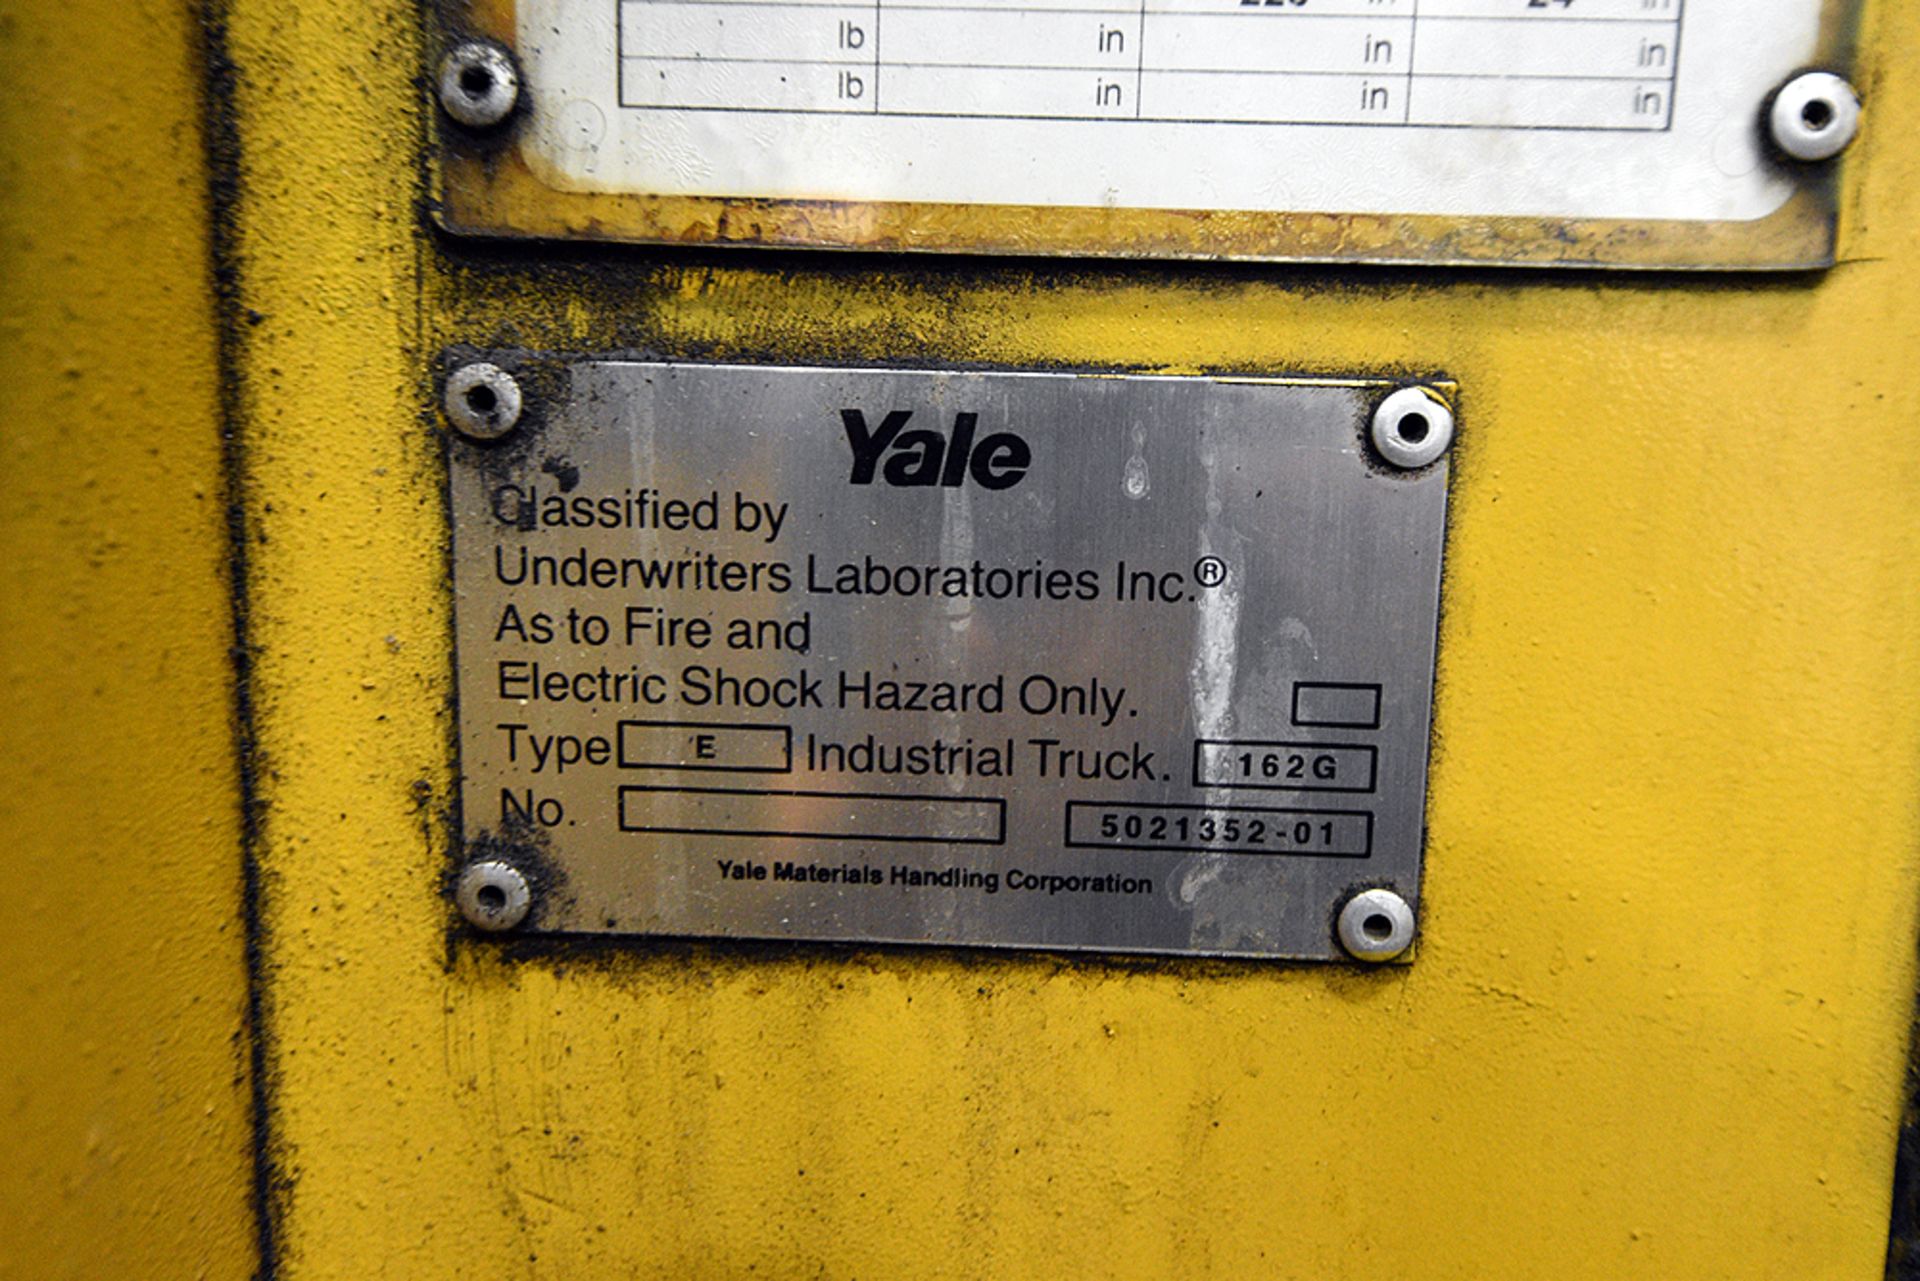 Yale Electric Double Deep Reach Truck, Lift Capacity 3,000Lbs. - Image 8 of 13